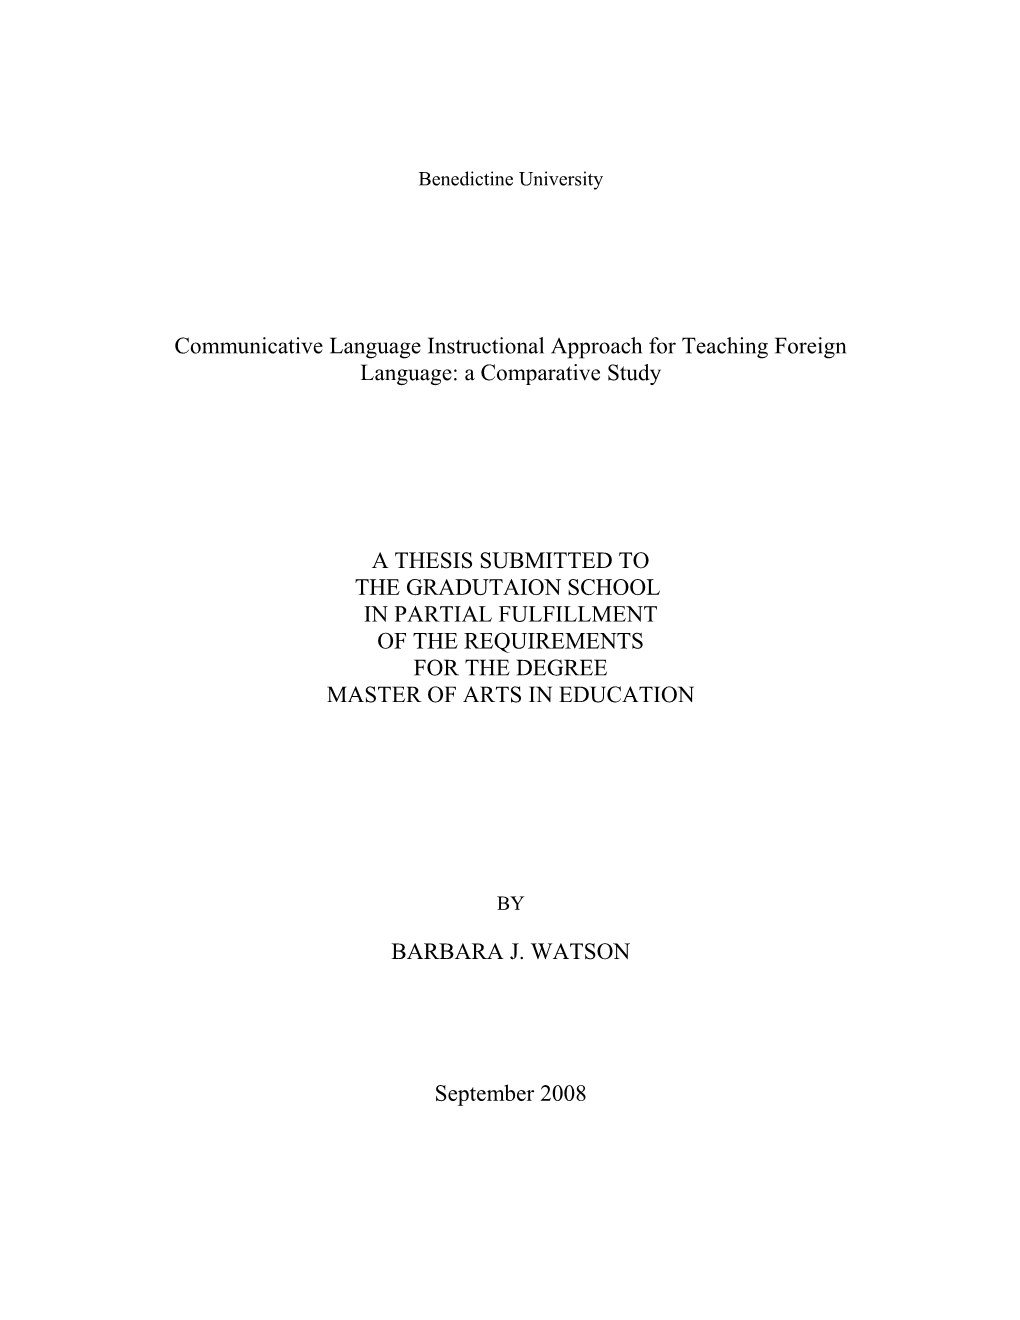 Communicative Language Instructional Approach for Teaching Foreign Language: a Comparative Study